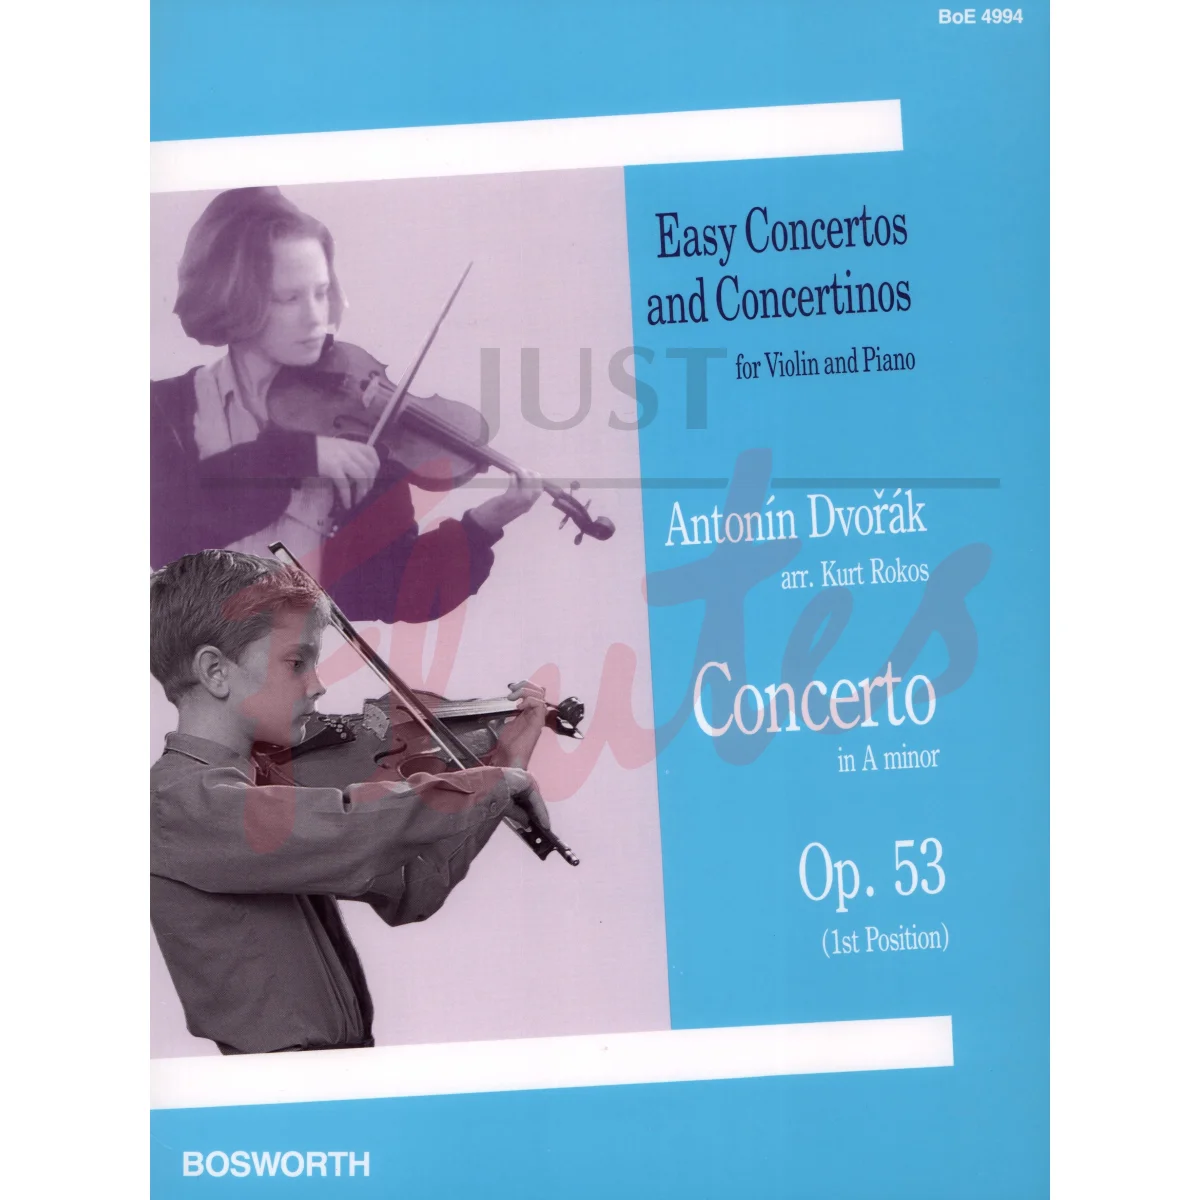 Concerto in A minor (1st Position) for Violin and Piano